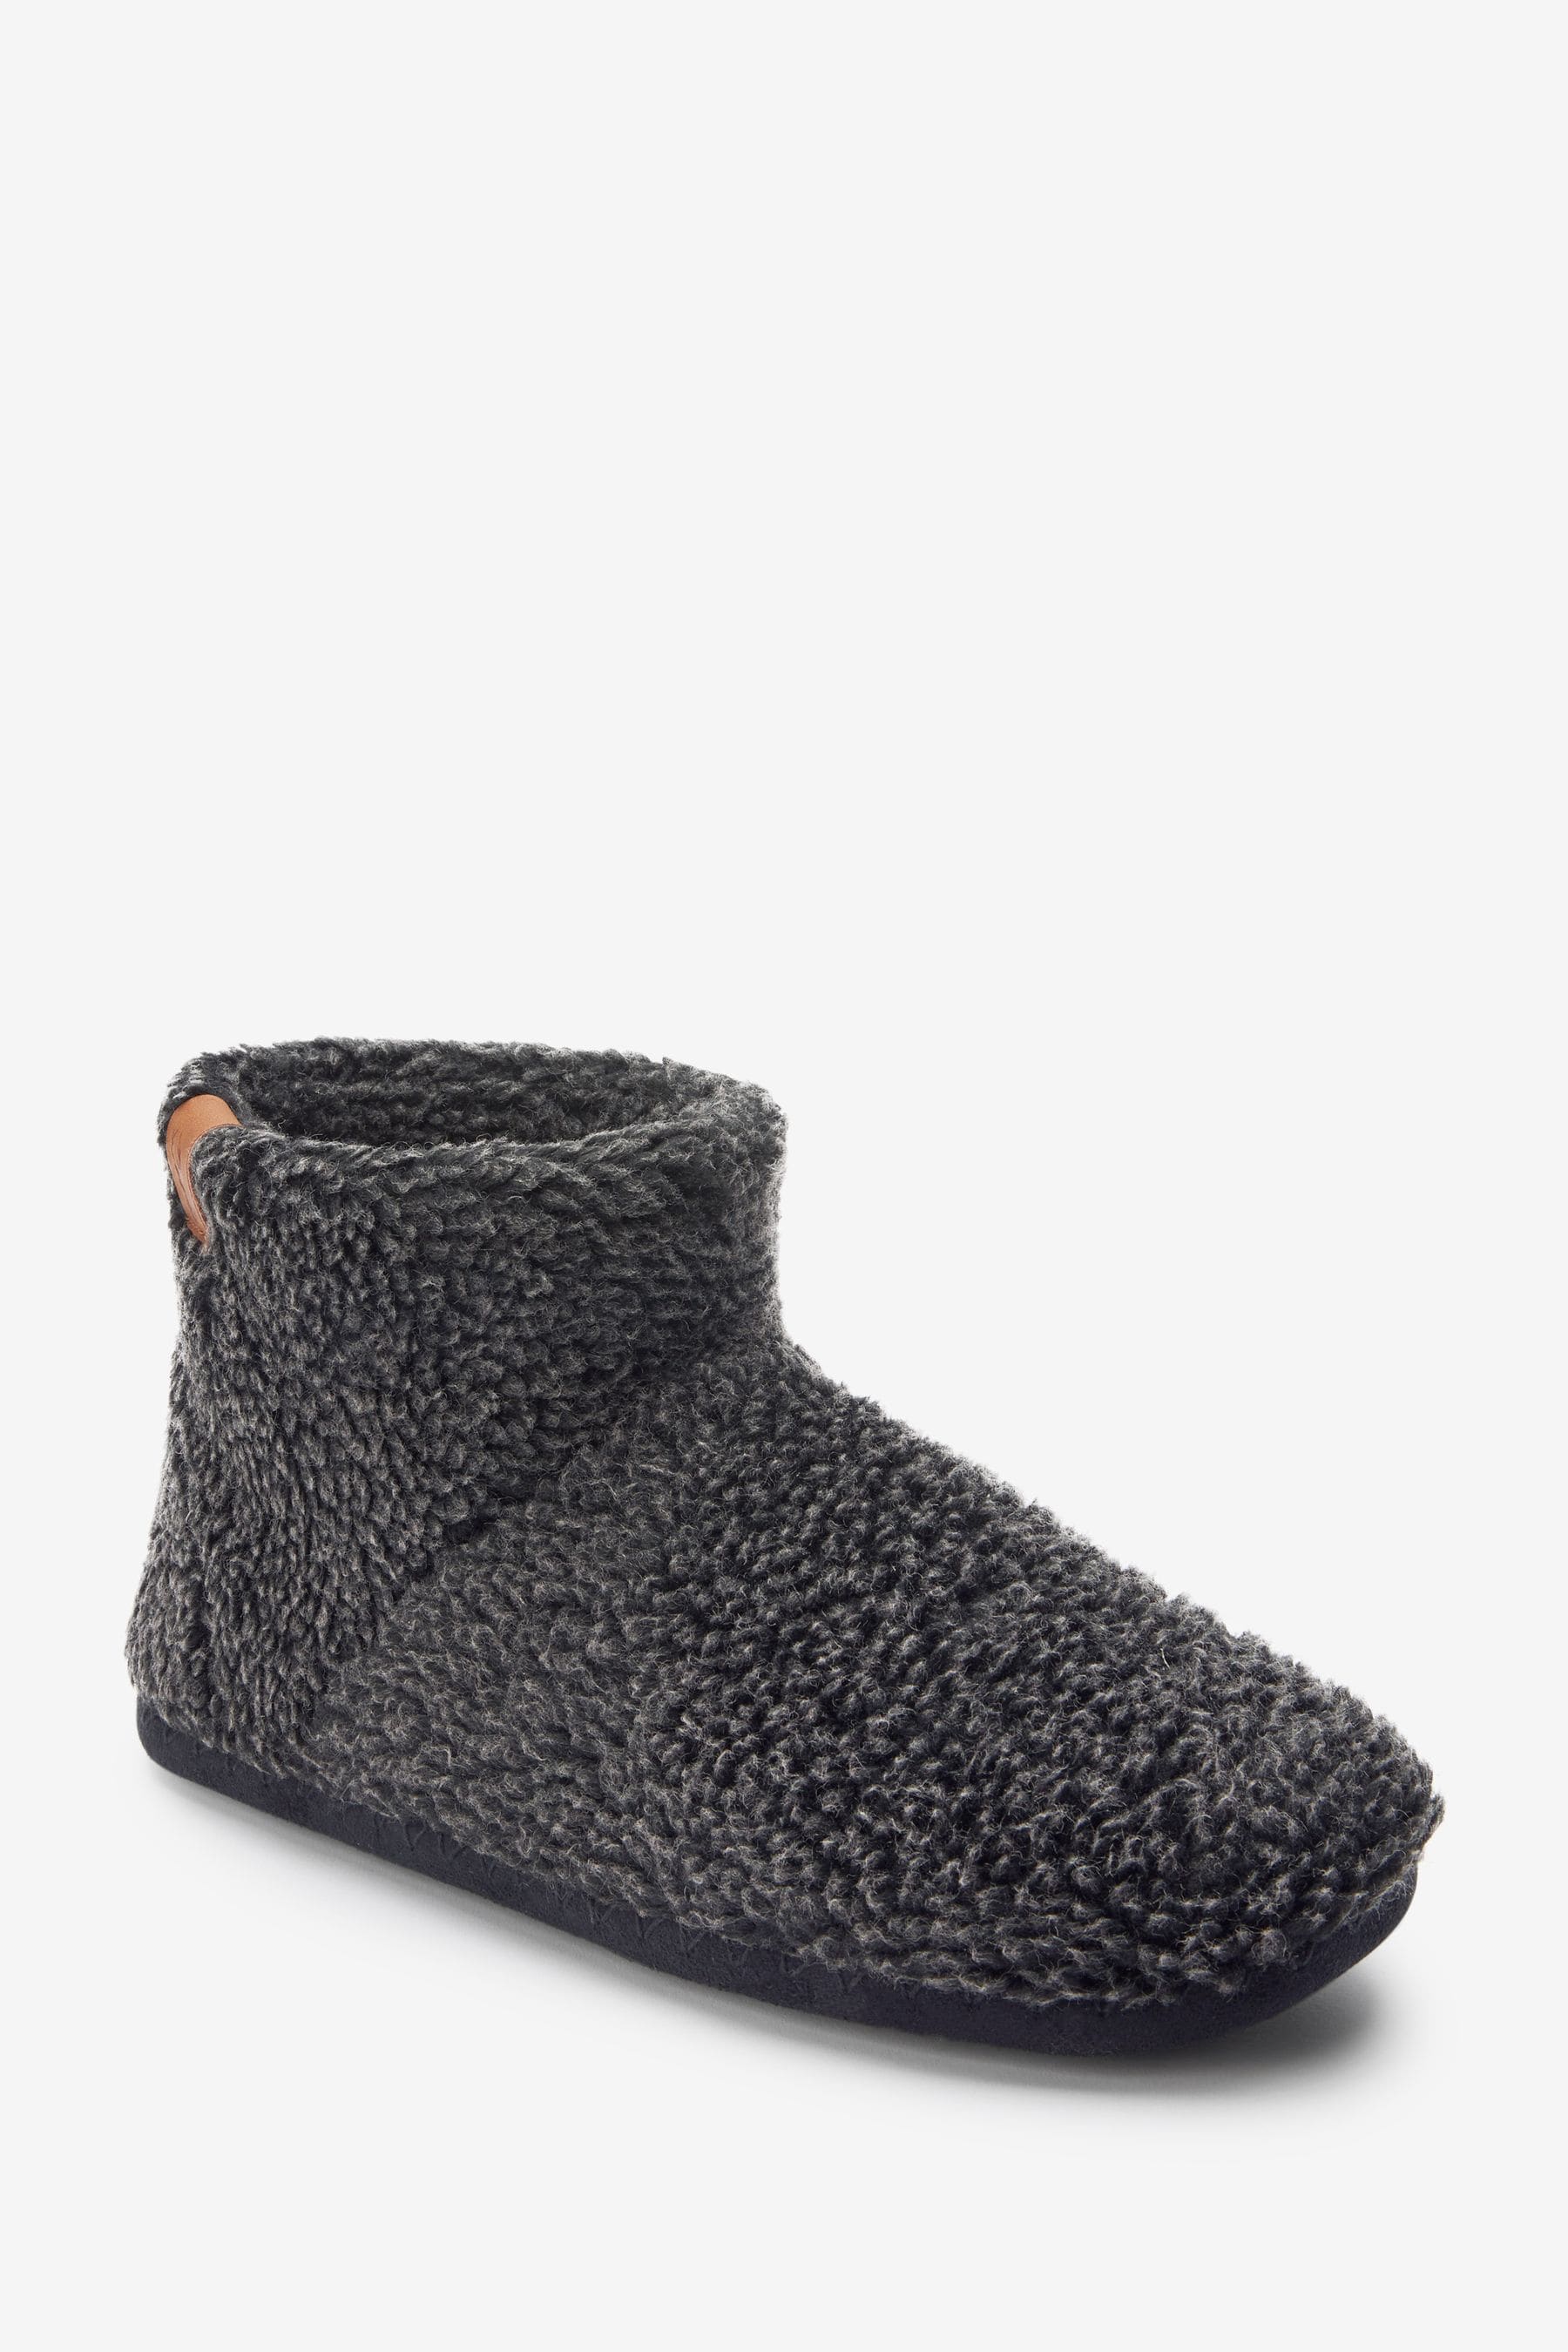 Buy Next Borg Slipper Boots from Next Germany